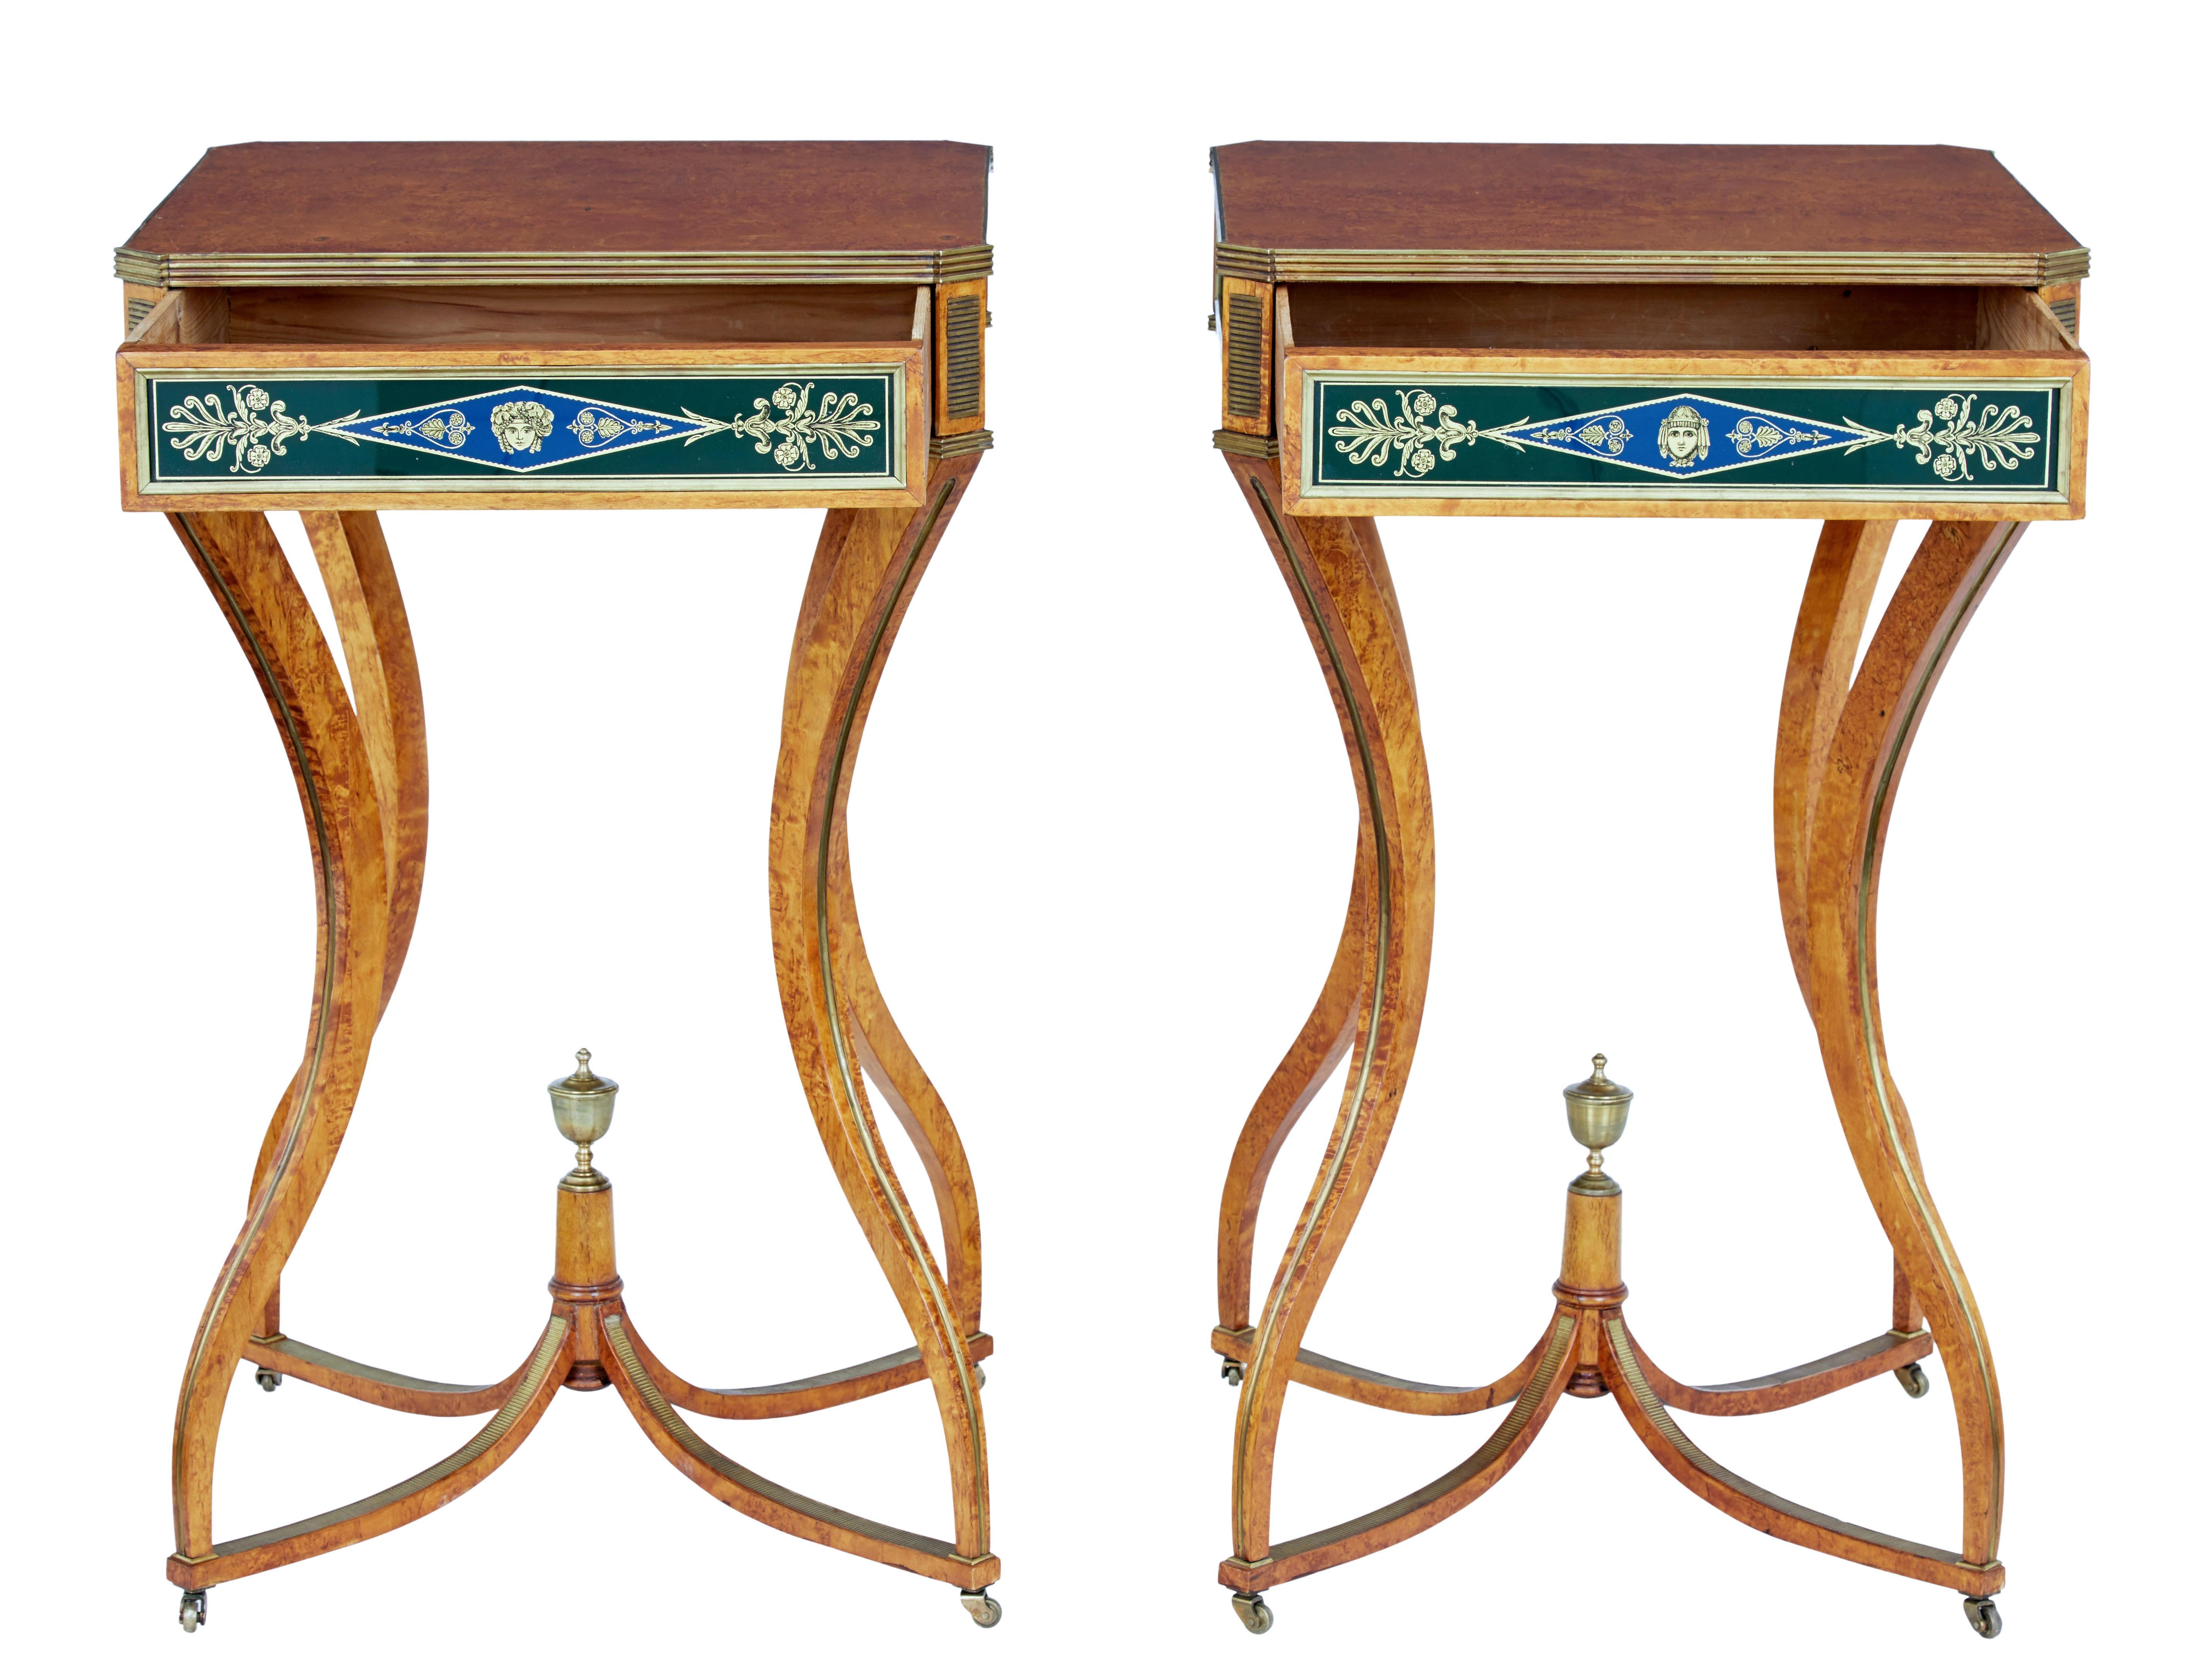 Pair of 19th century burr birch Russian occasional tables, circa 1890.

Fine quality pair of late 19th century Russian lamp tables. Square top with canted corners adorned with brass mounts. Single drawer to the front of each. Each side of these